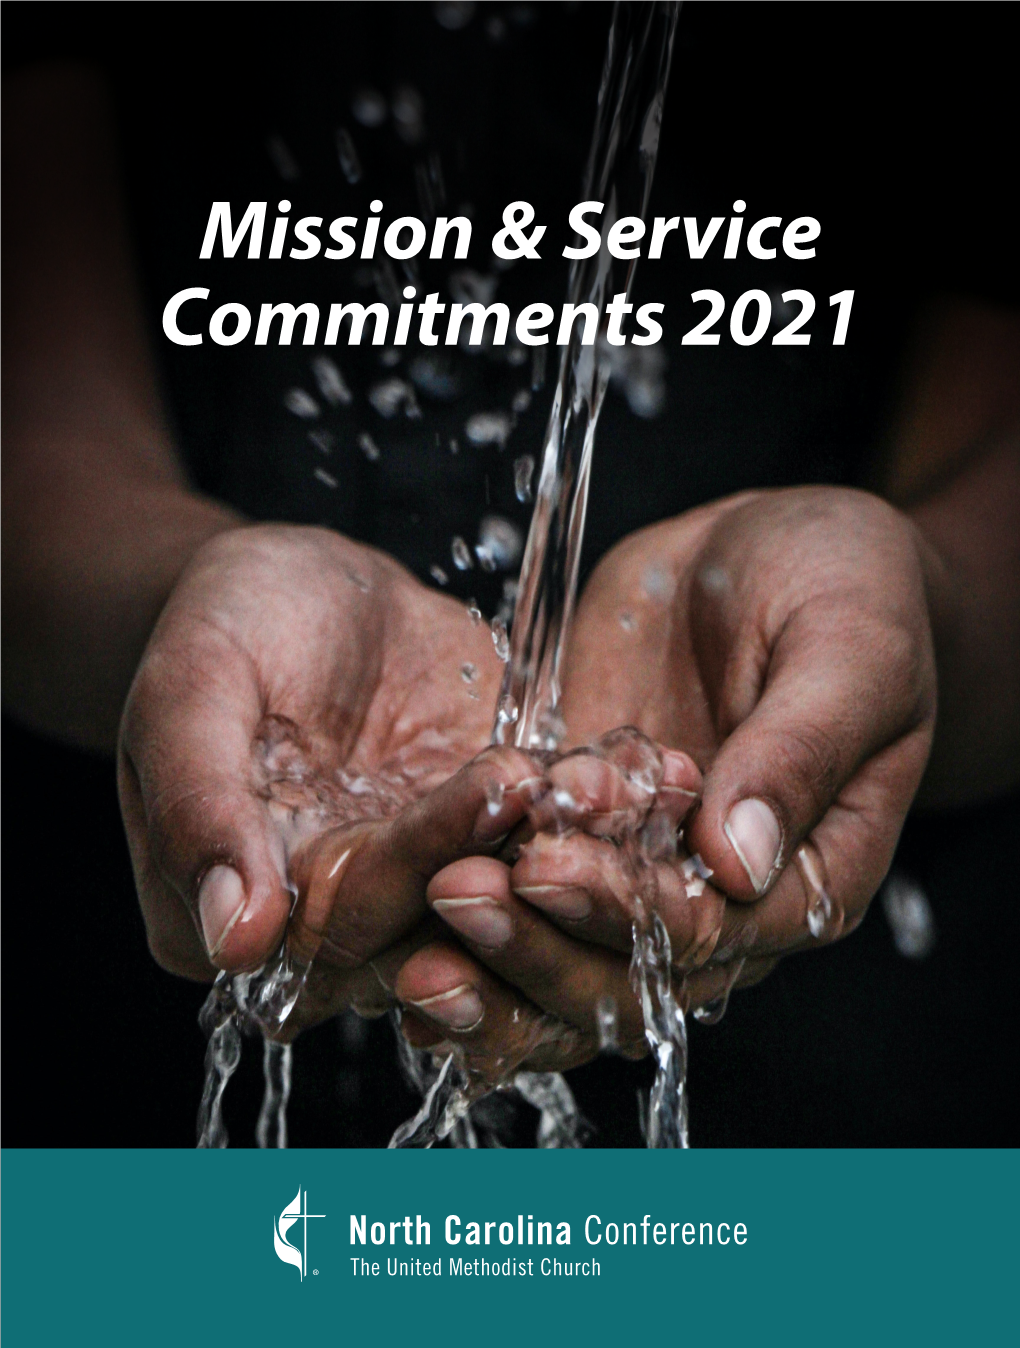 Mission & Service Commitments 2021